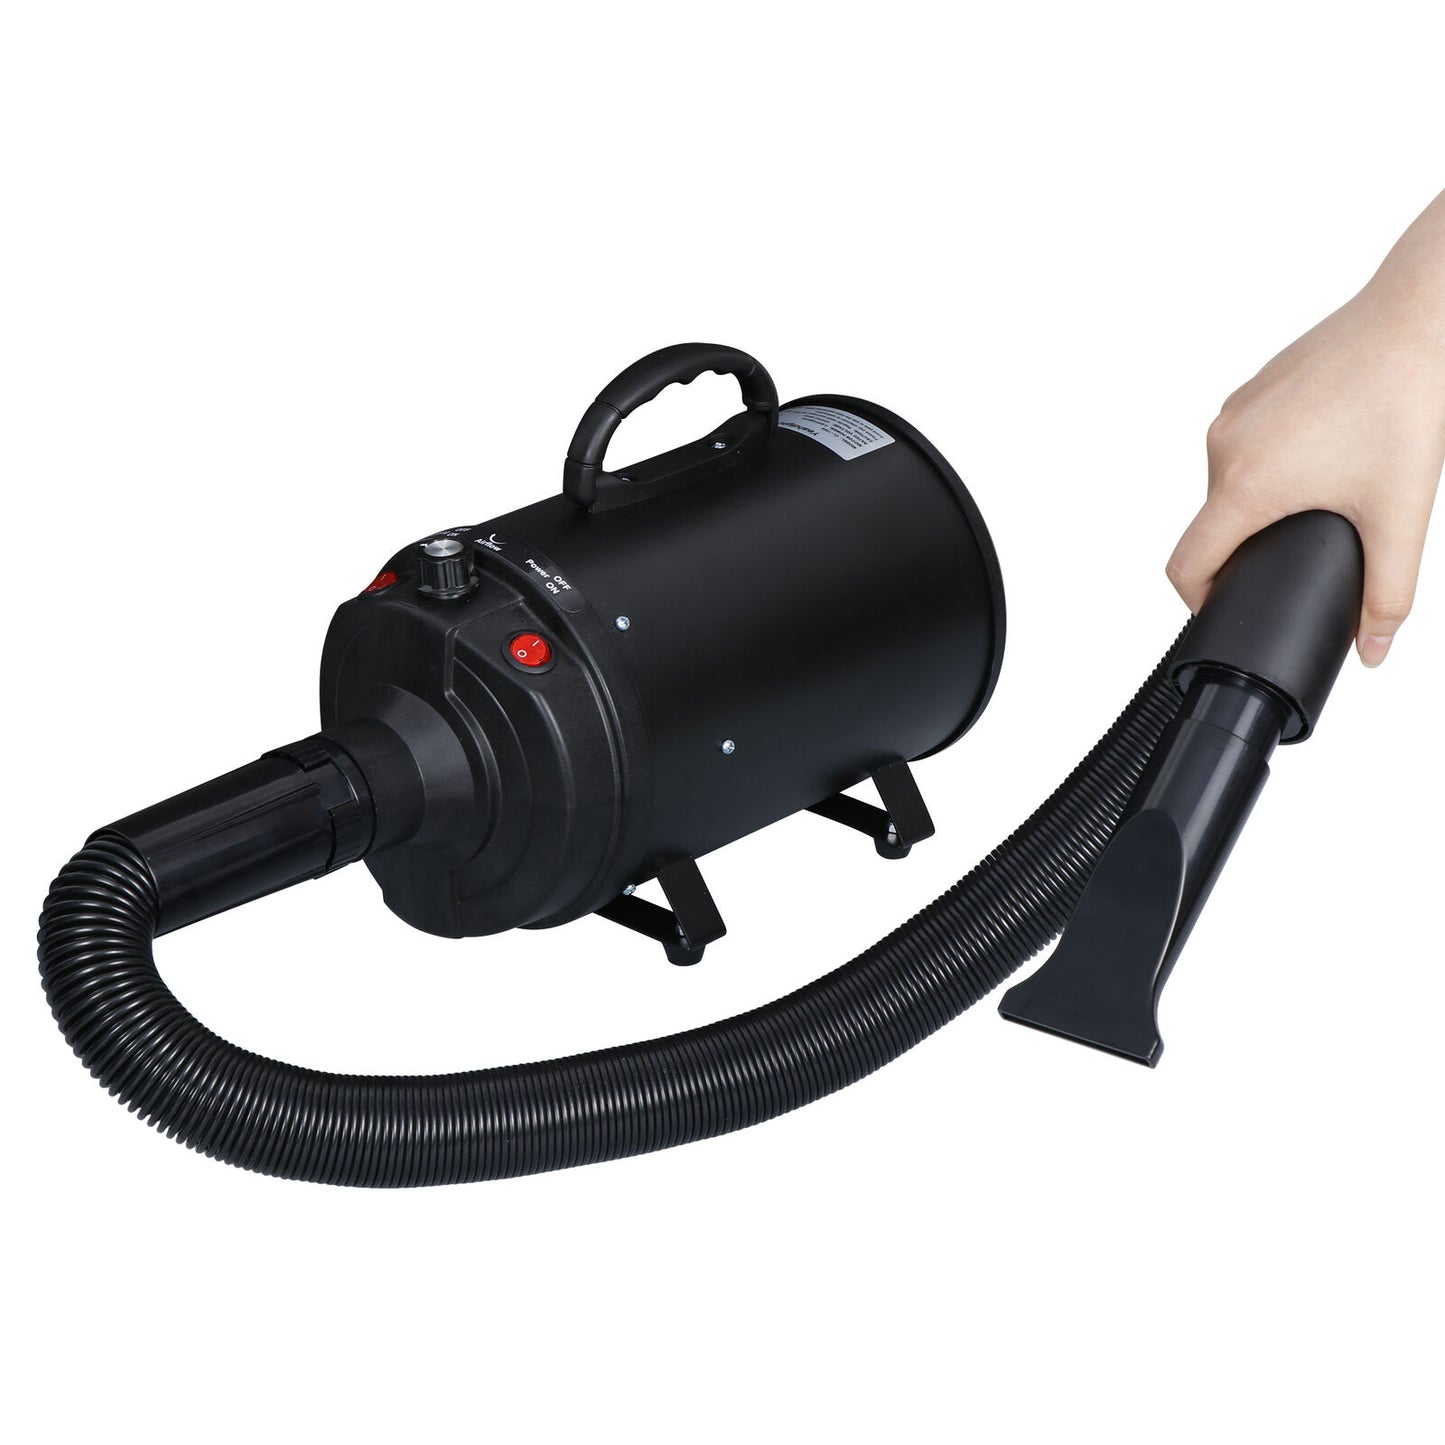 Portable Pet Hair Dryer Quick Blower Heater w/ 3 Nozzles Dog Cat Grooming Black